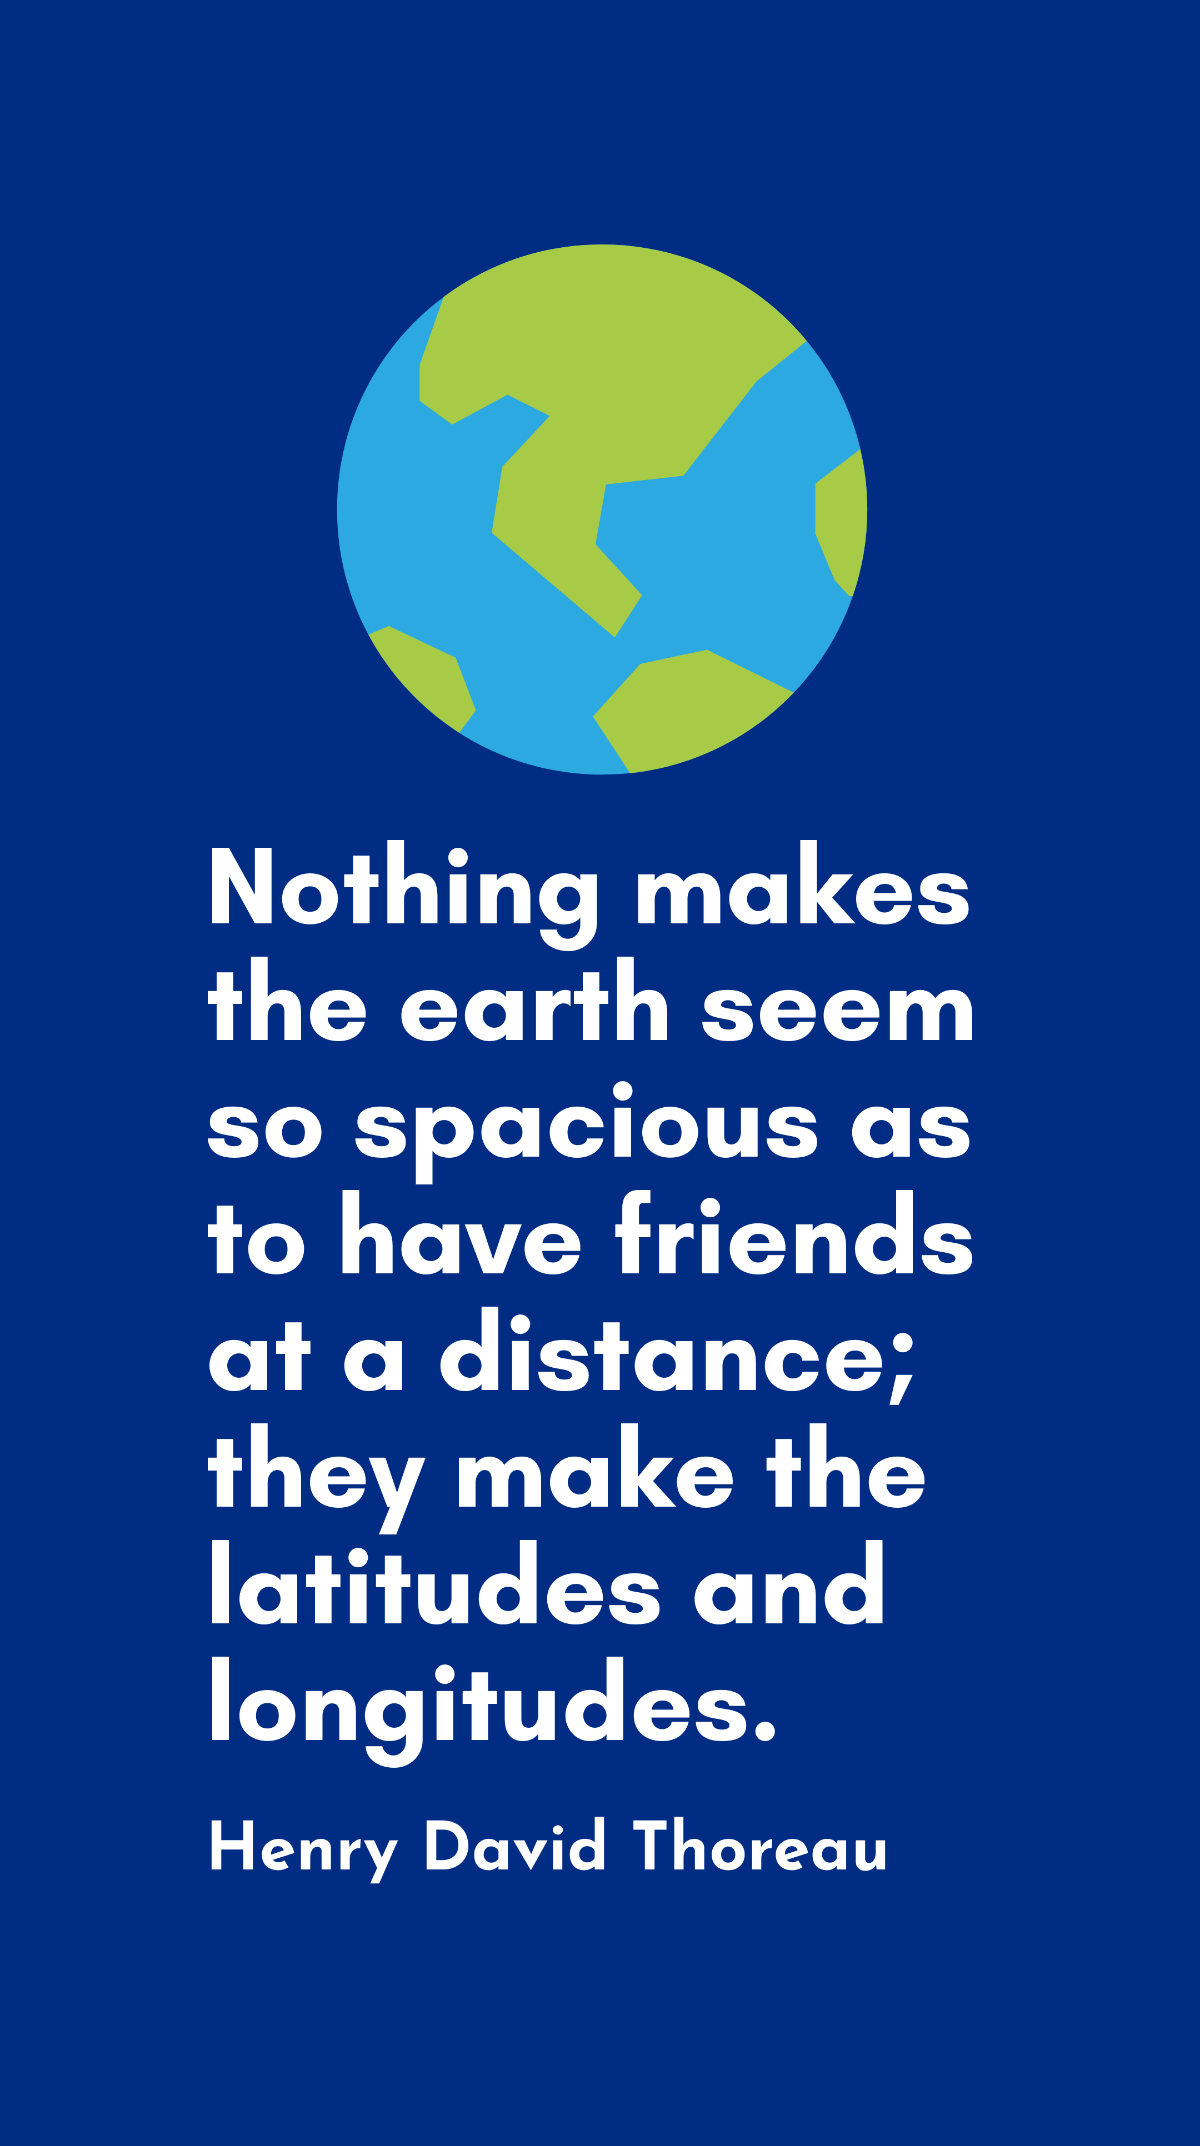 Henry David Thoreau - Nothing makes the earth seem so spacious as to have friends at a distance; they make the latitudes and longitudes. Template